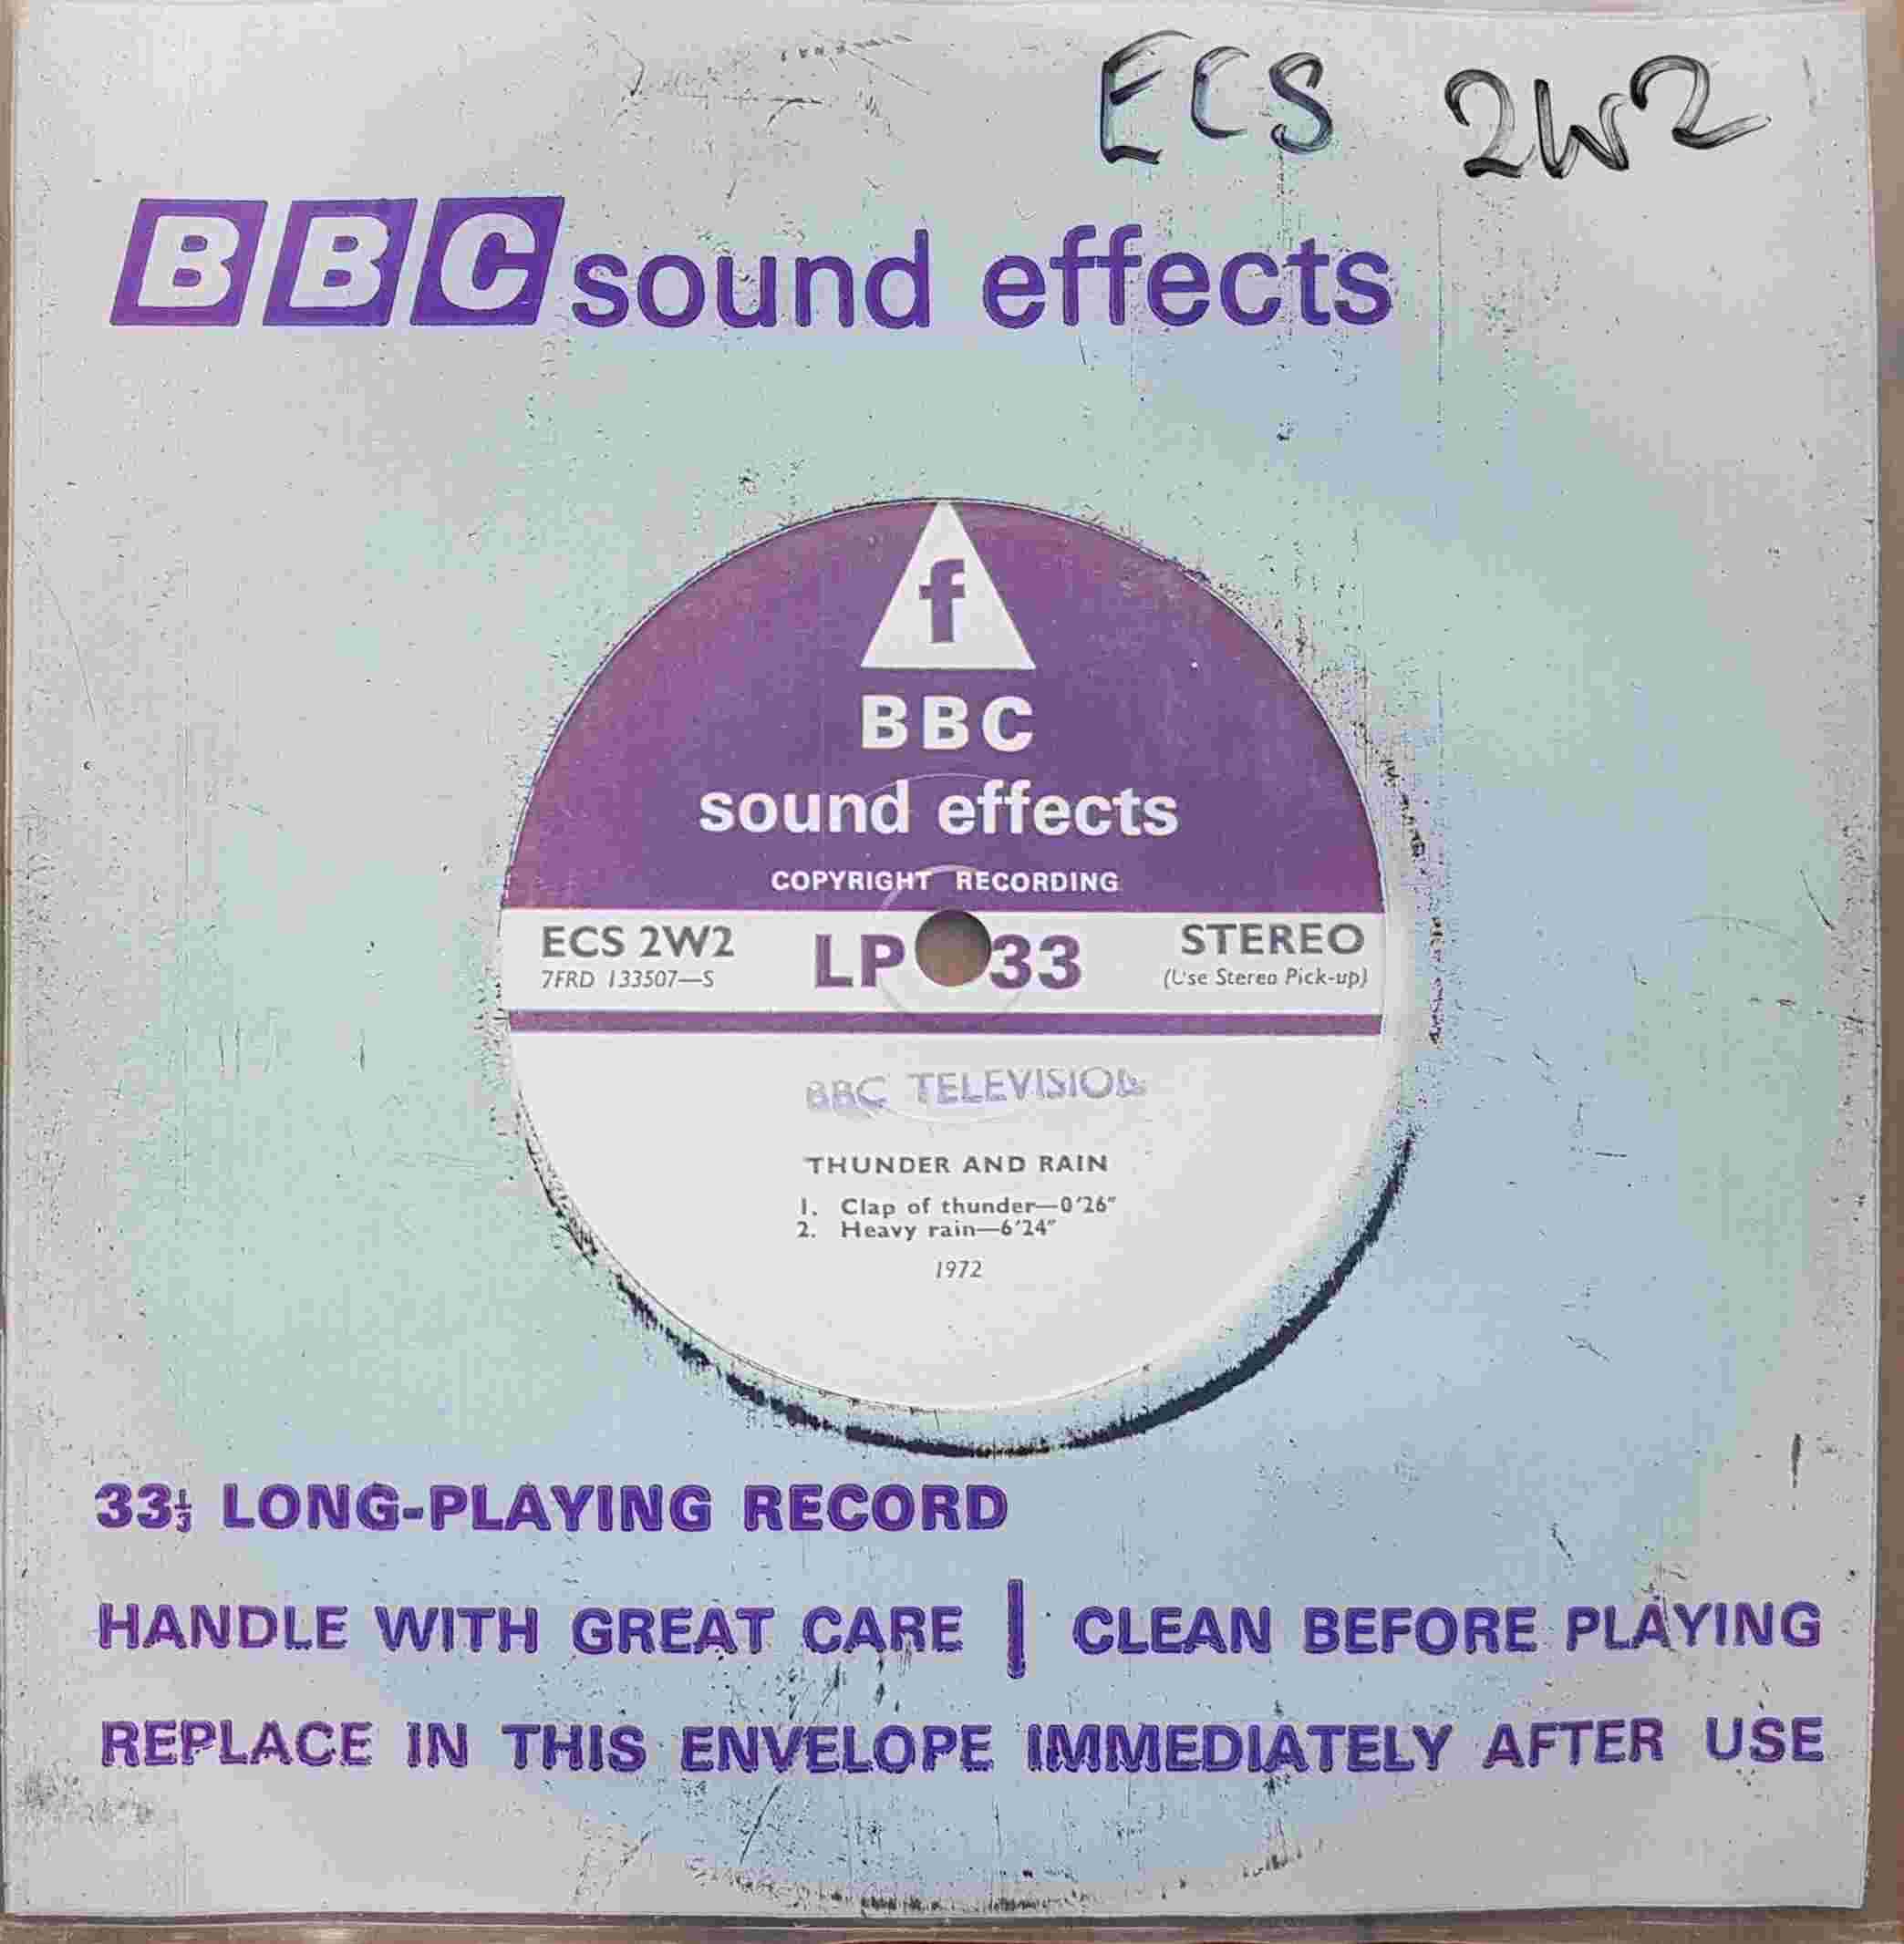 Picture of ECS 2W2 Thunder & rain by artist Not registered from the BBC records and Tapes library